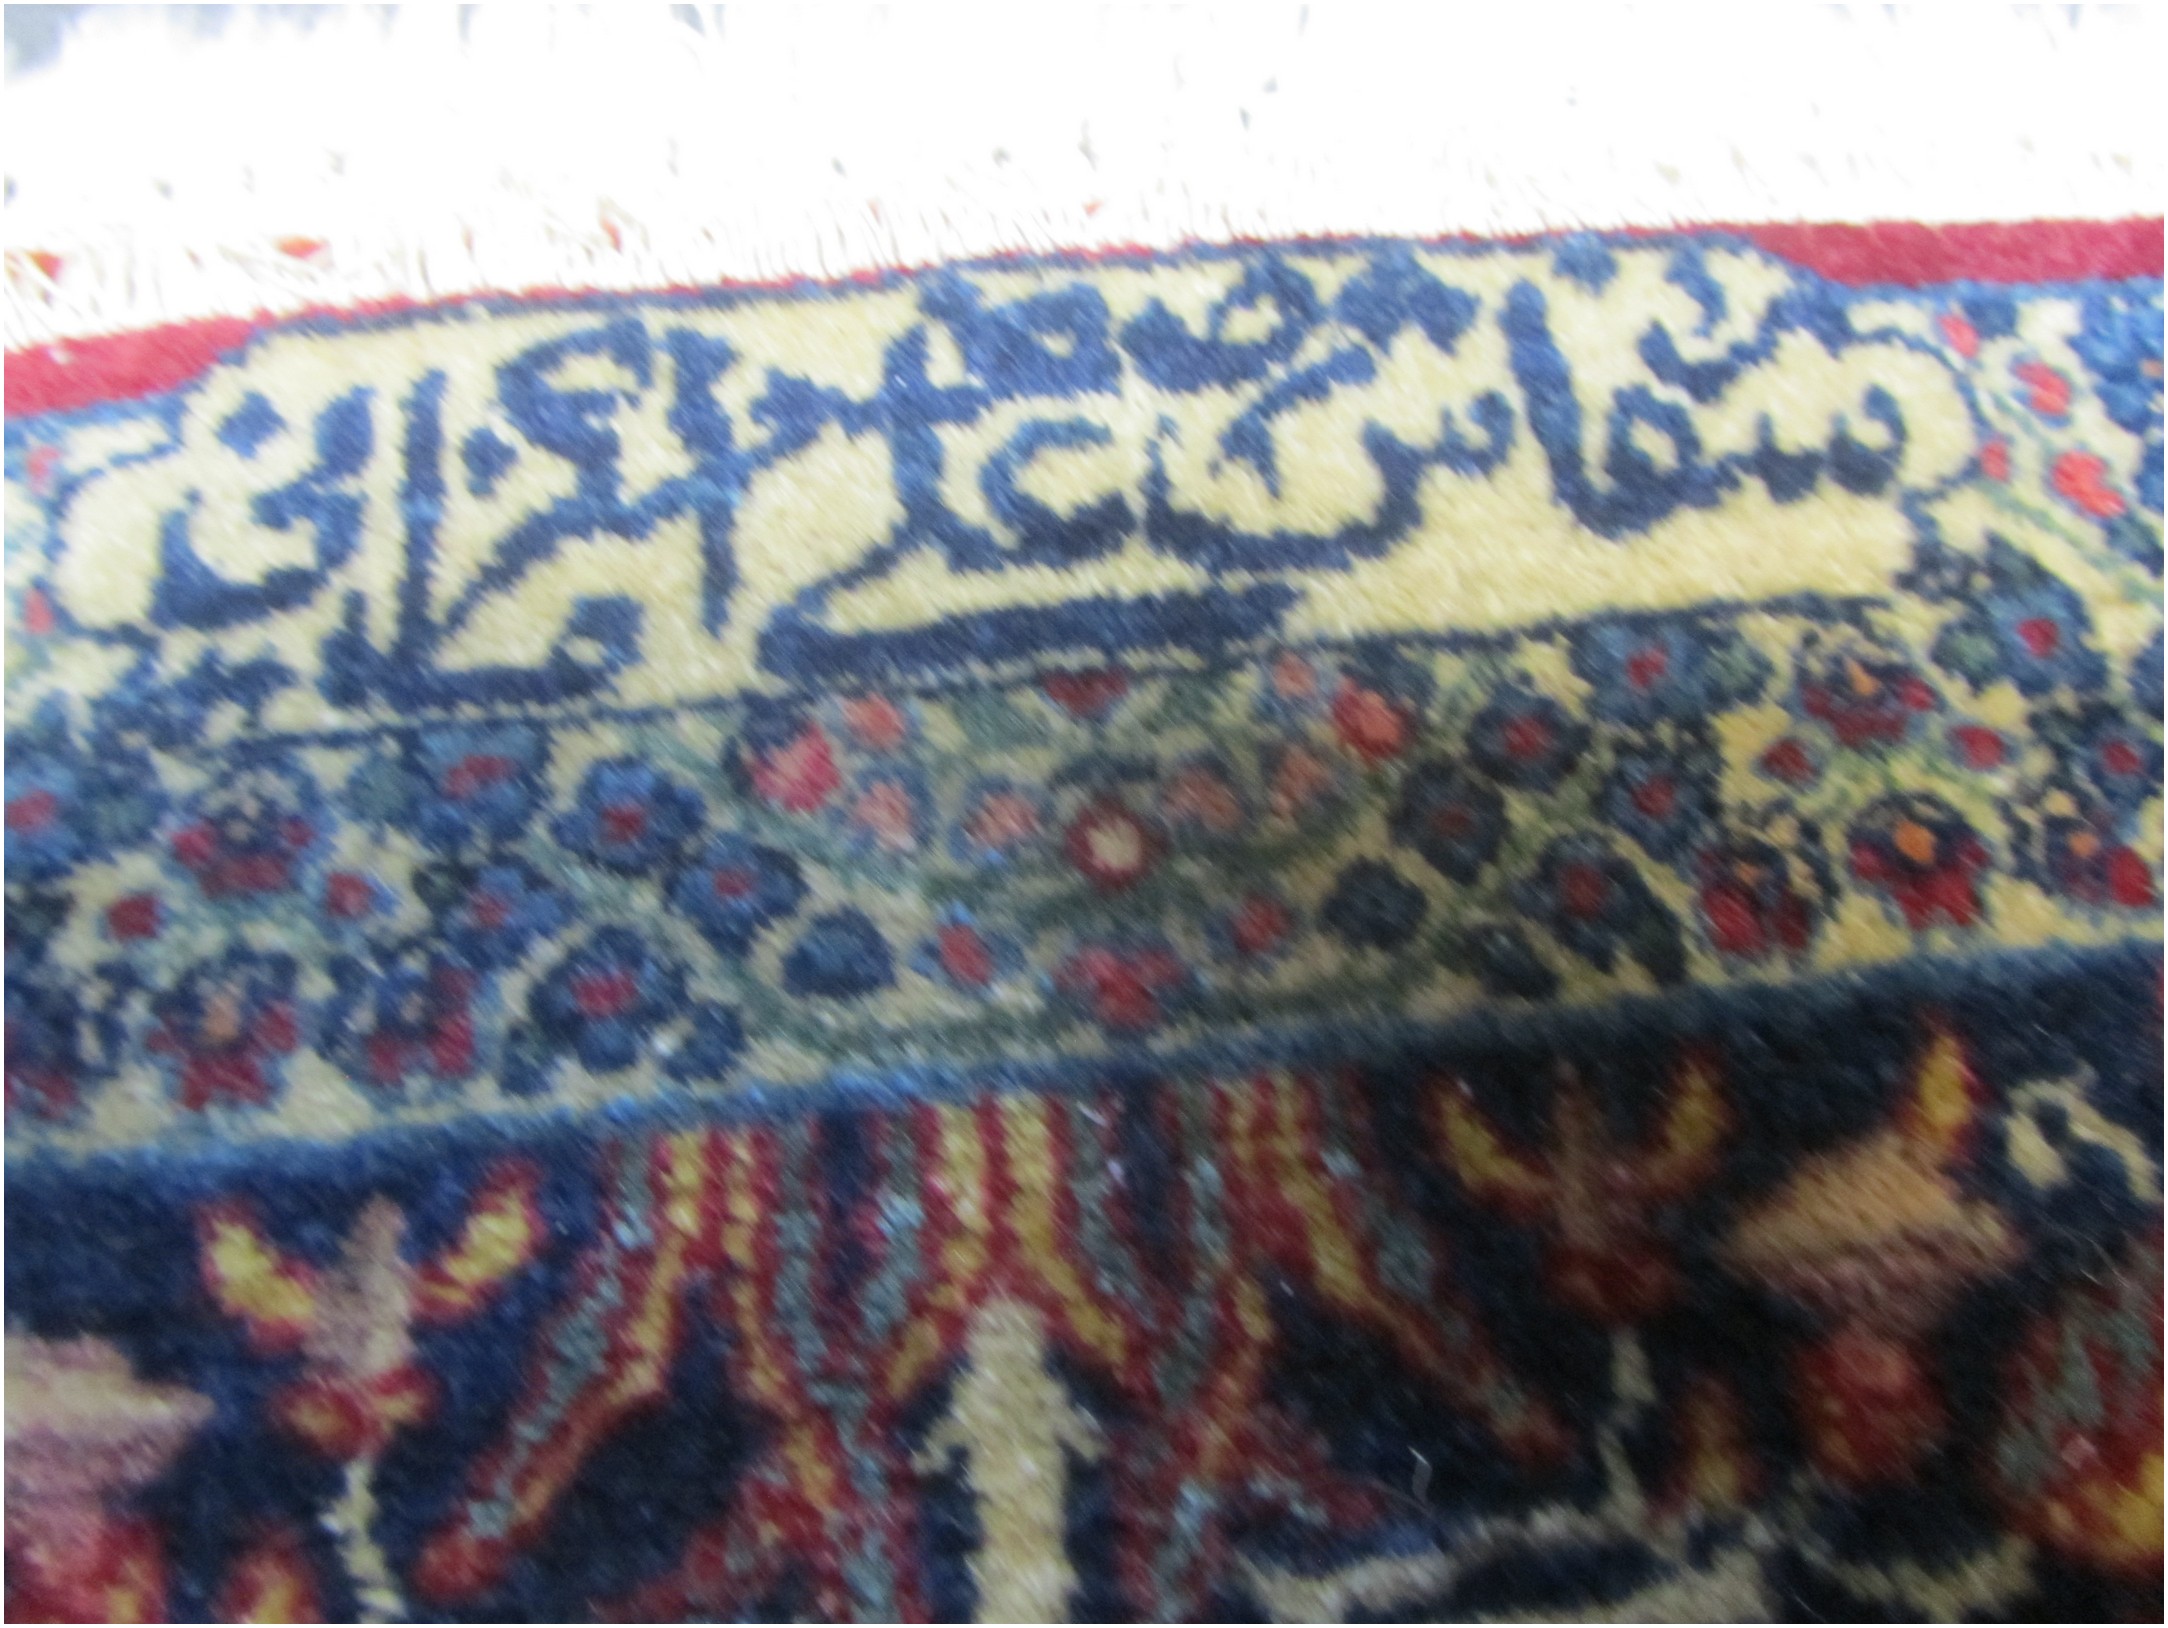 The second signature says COMMISSIONED BY ASGHAR ALI KERMANI